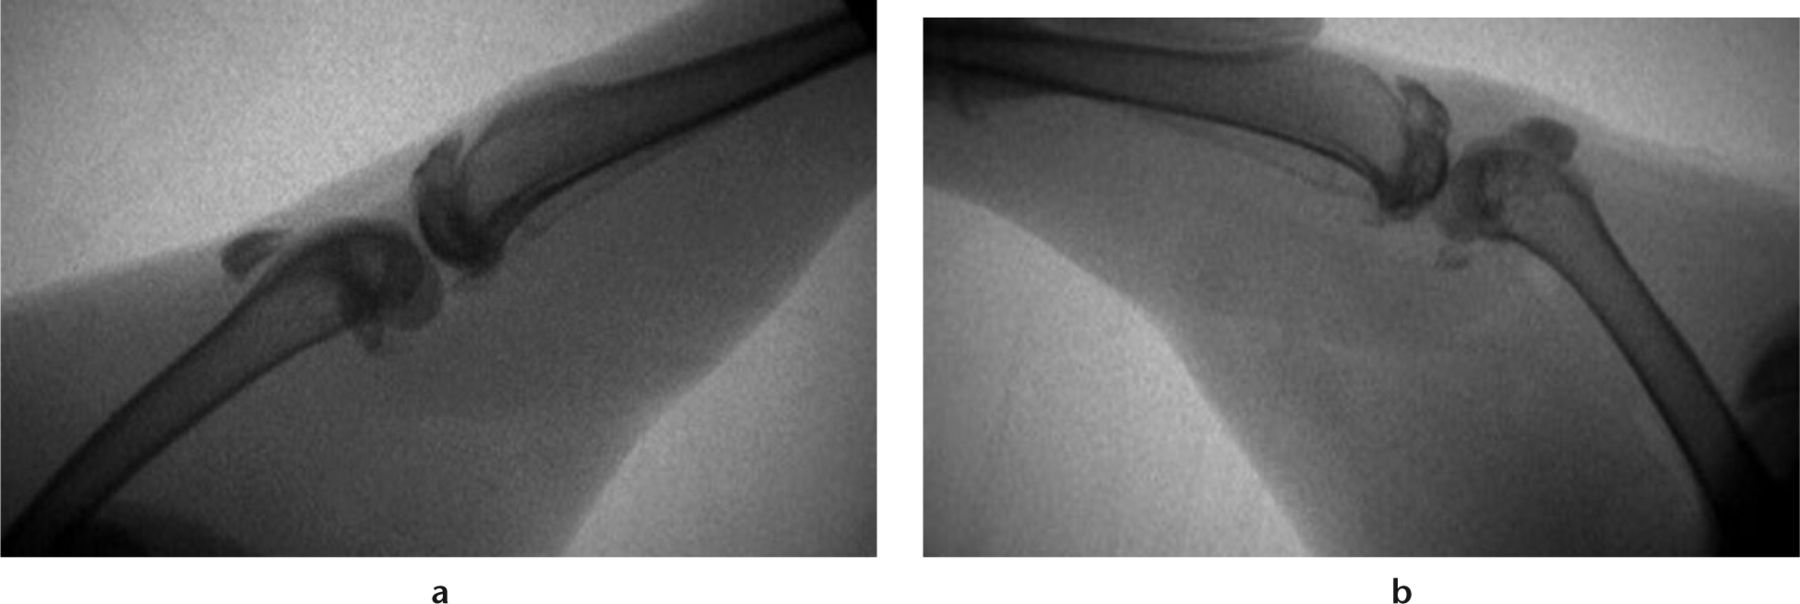 Fig. 2 
          Radiographs of a) the contralateral limb in gentle extension and b) the operative limb following limited capsular release, with a gentle extension force. (From Barlow JD, Hartzler RU, Abdel MP, et al. Surgical capsular release reduces flexion contracture in a rabbit model of arthrofibrosis. J Orthop Res 2013;31:1529-1532).14
        